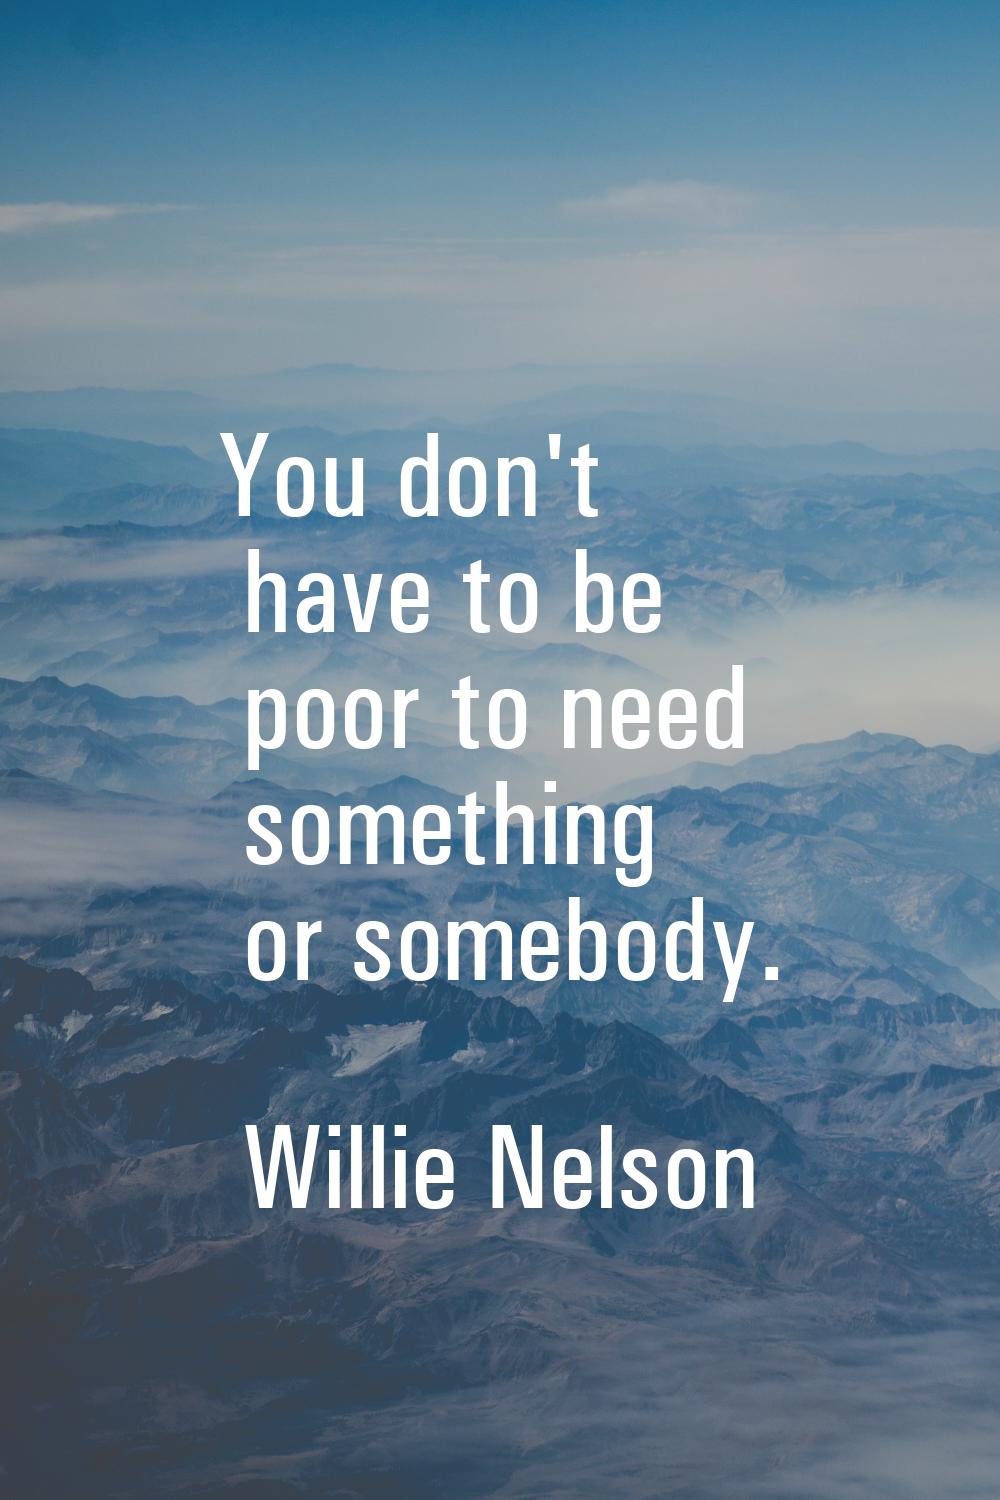 You don't have to be poor to need something or somebody.